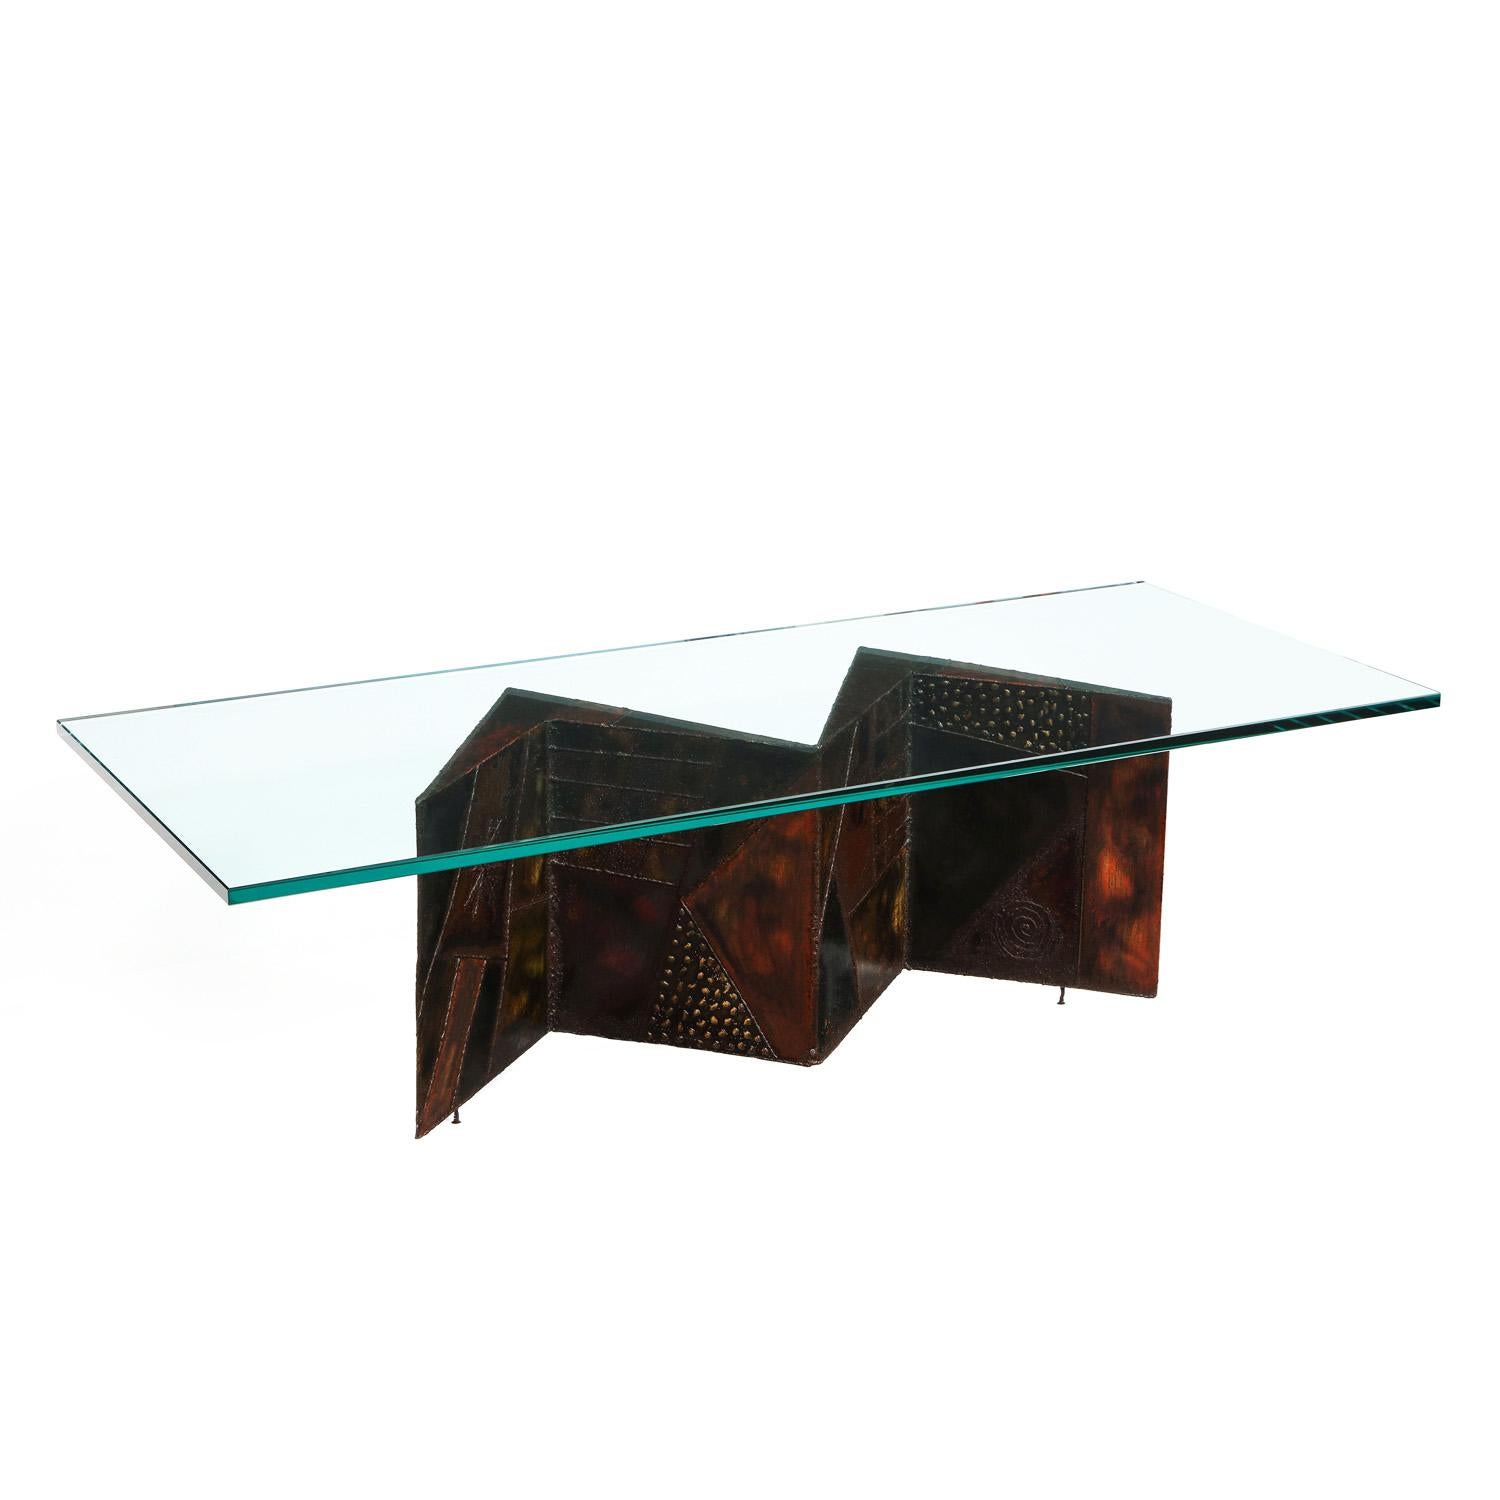 Modern Paul Evans Artisan PE-11 Coffee Table 1974 'Signed And Dated'